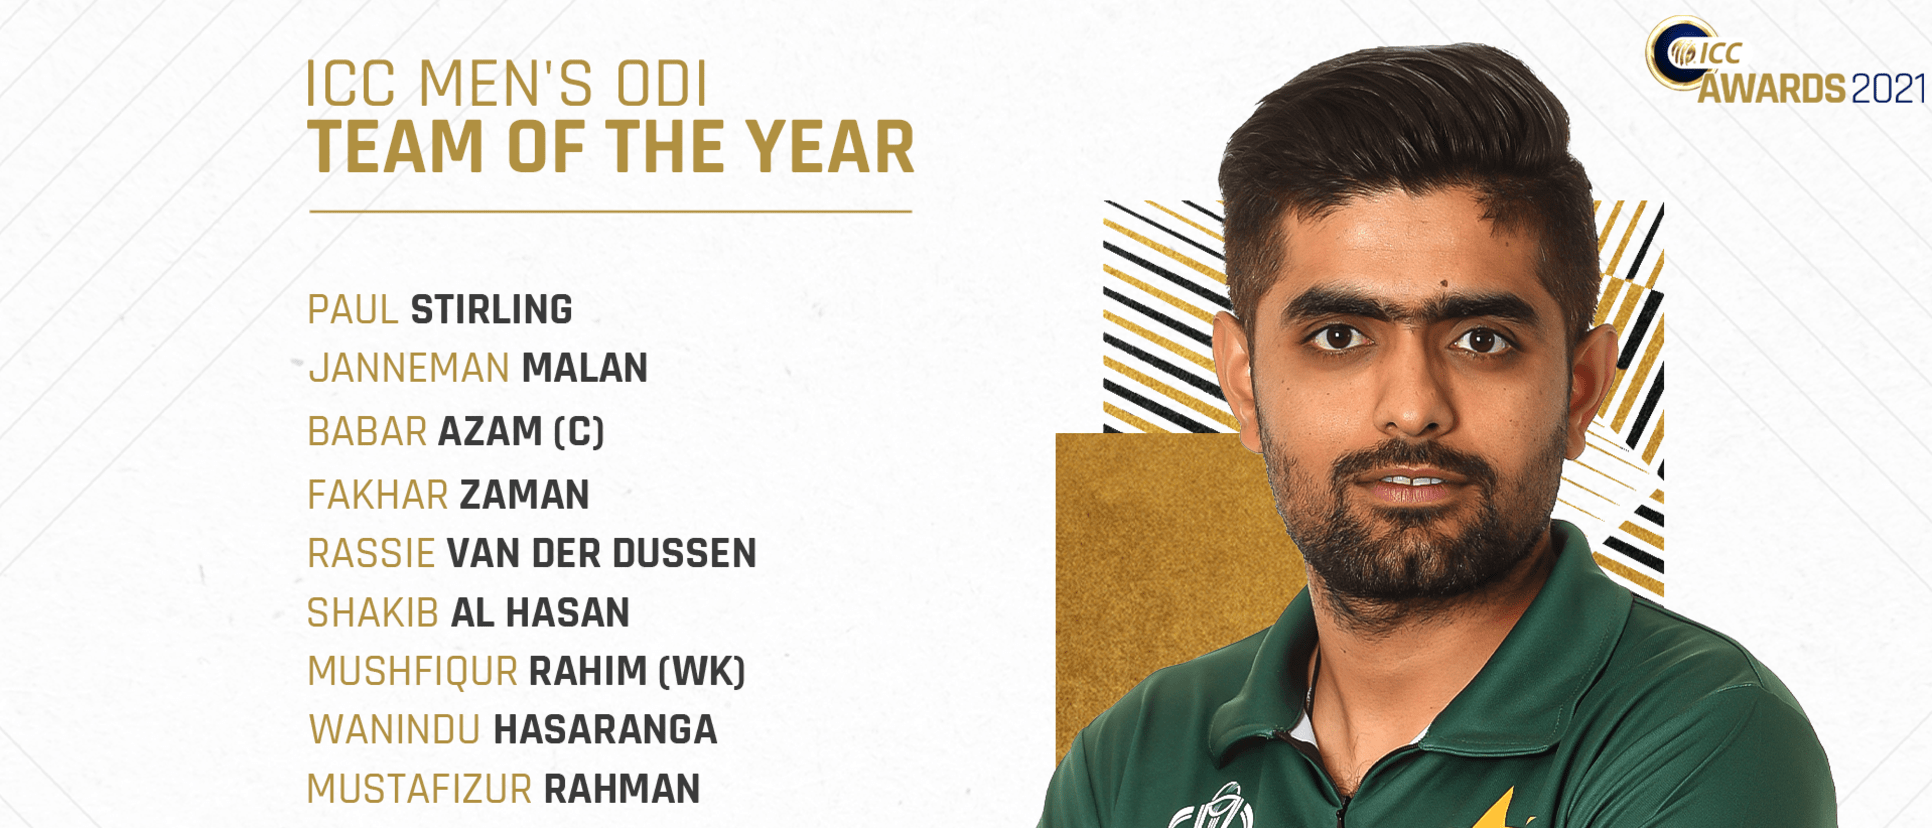 The ICC Men's ODI Team of the Year 2021!